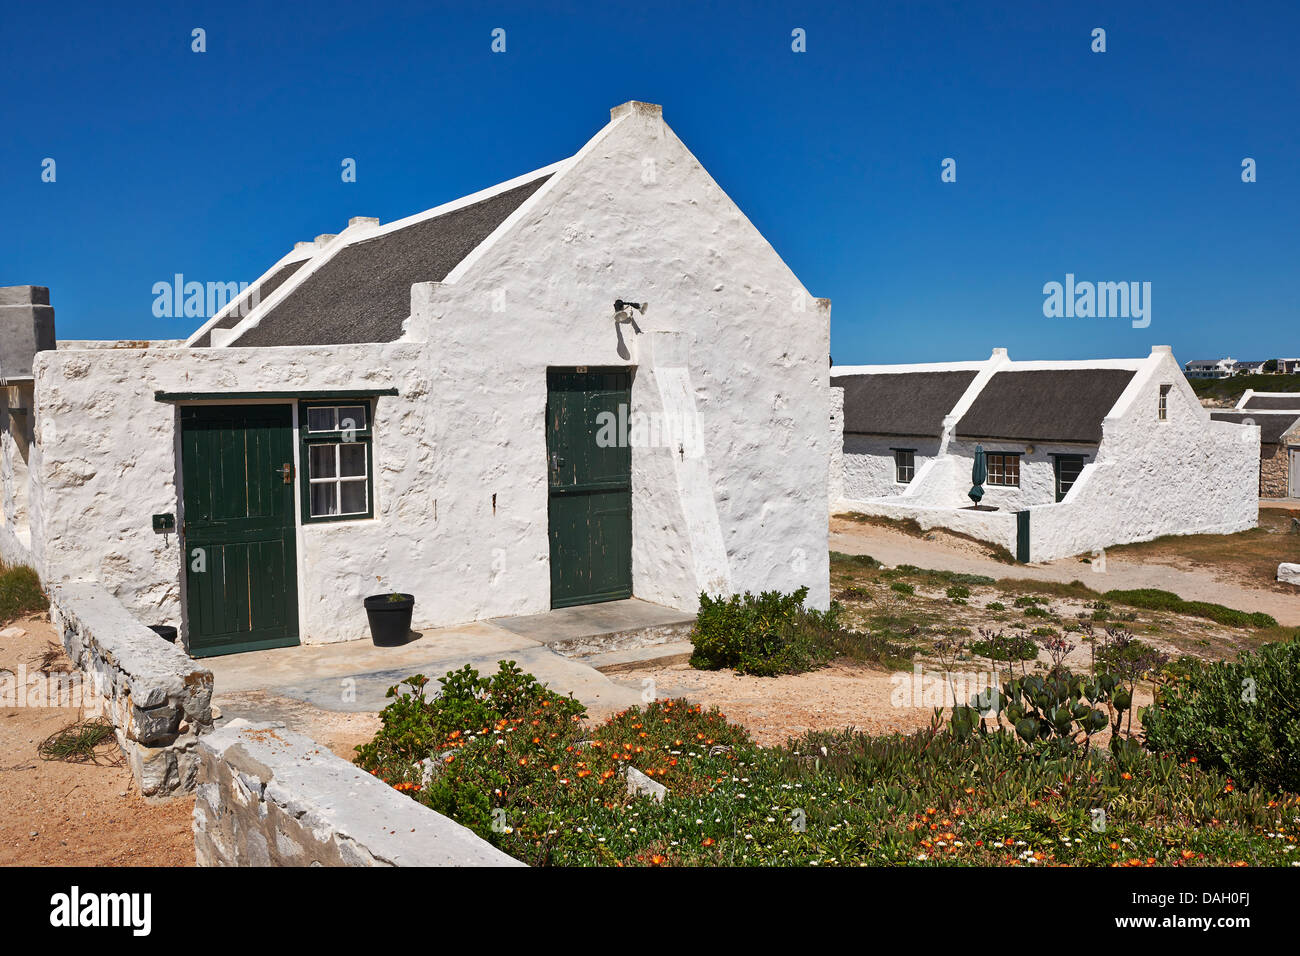 white washed reed thatched roof cottages in Kassiesbaai, Arniston, Cape Agulhas, Western Cape, South Africa Stock Photo